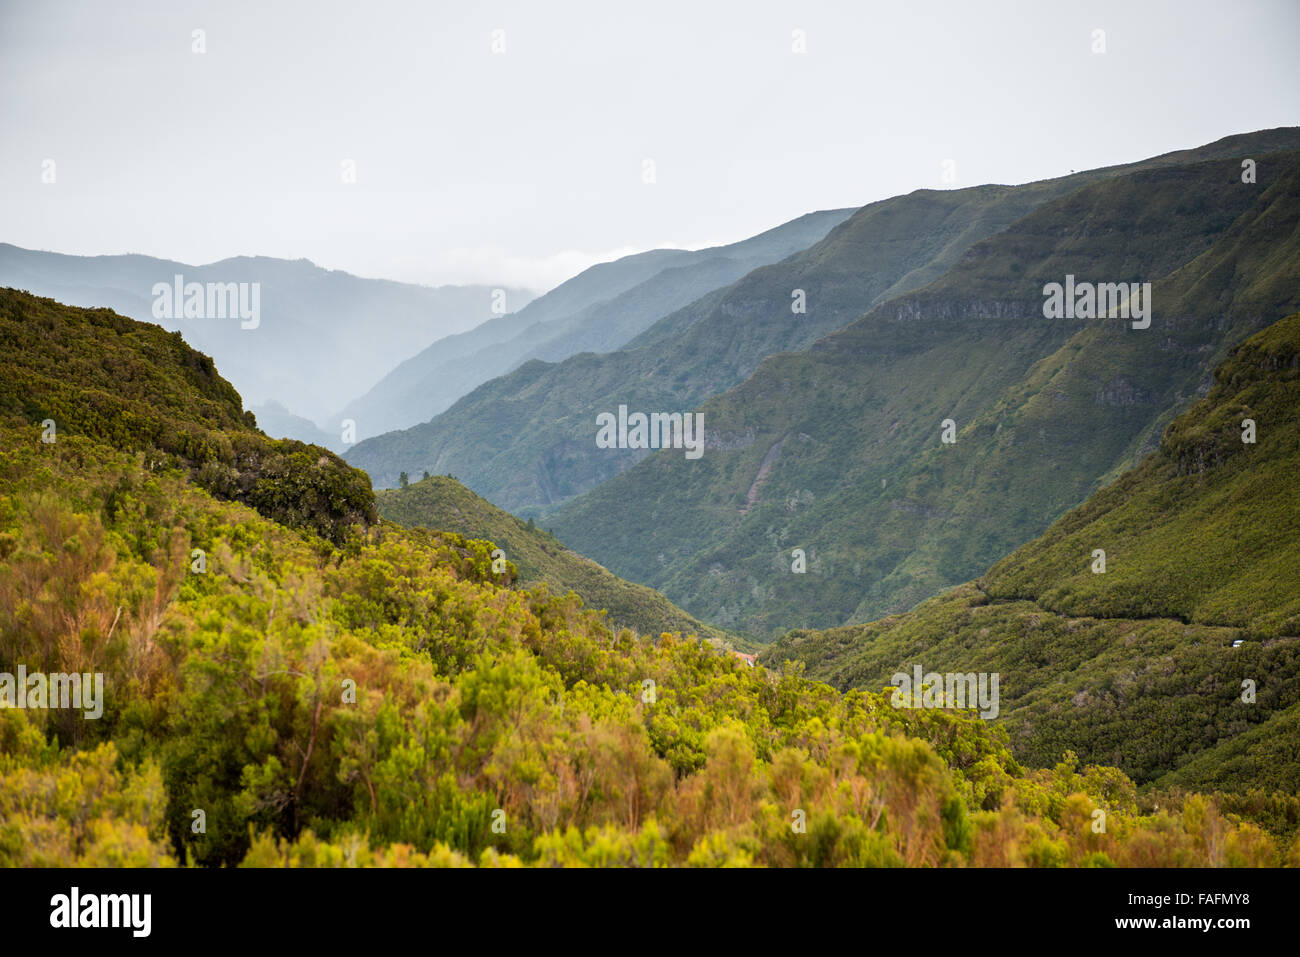 Mountain top scenic view on the island of Madeira Stock Photo